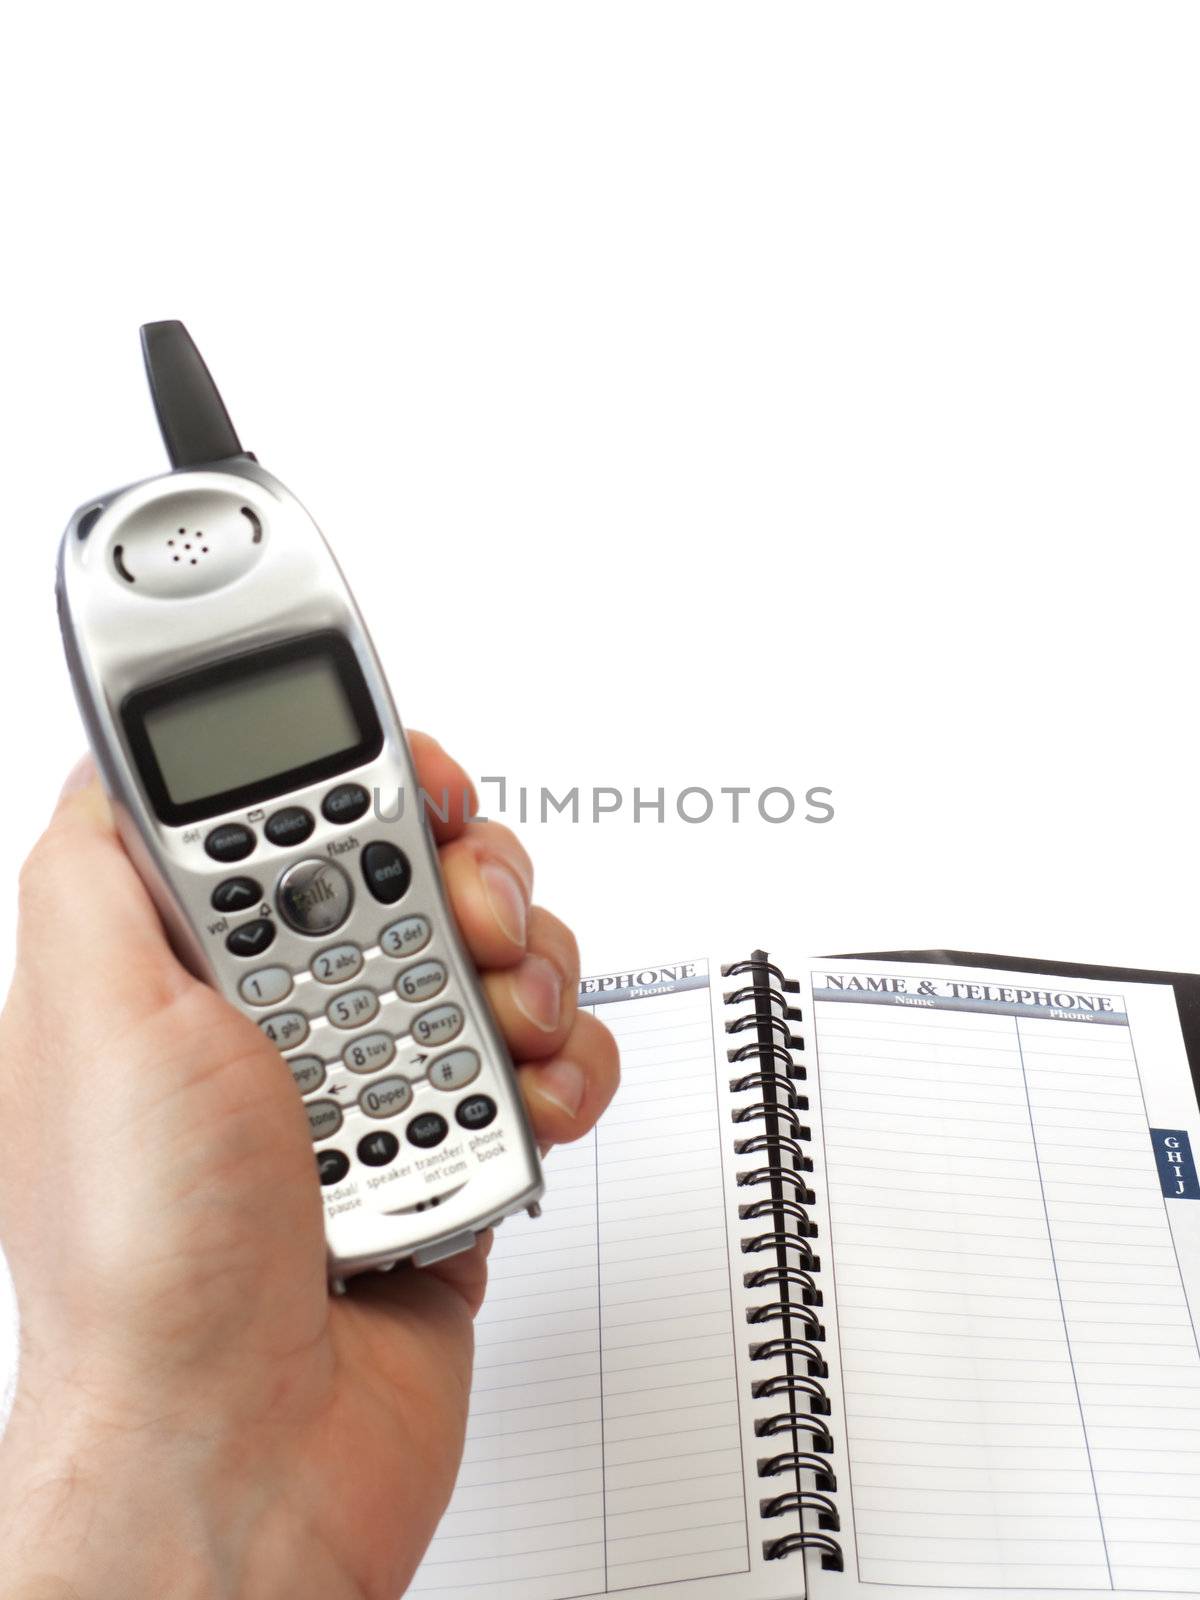 A hand holding a cordless phone, with the display facing the camera, and a blank telephone directory, isolated on white.